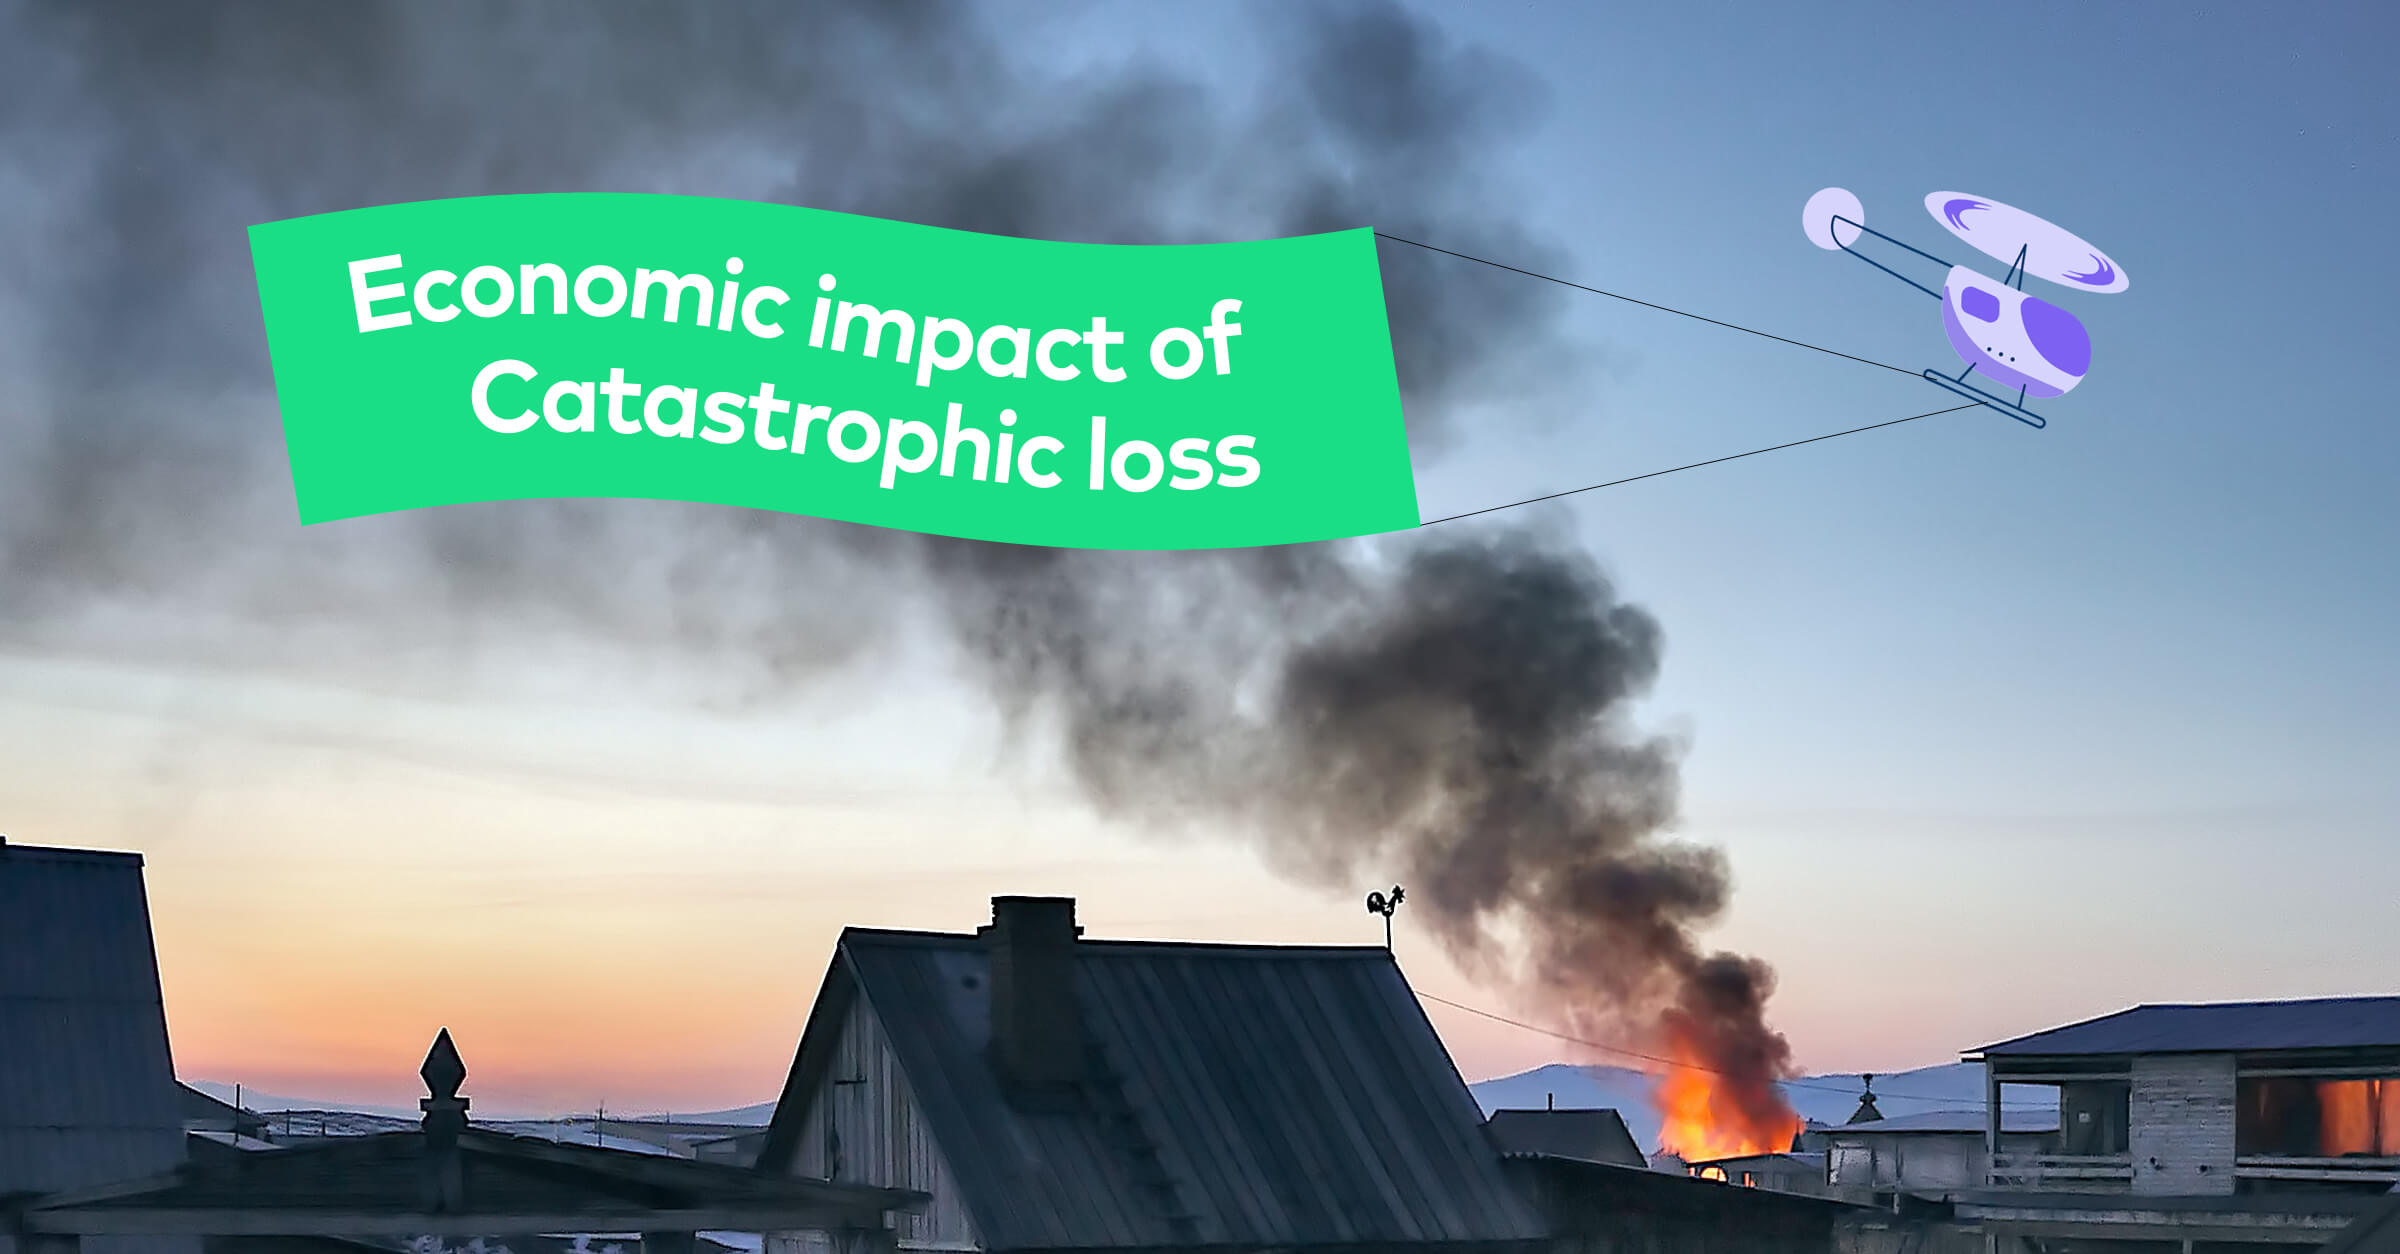 skyline showing a home on fire in the distance and an illustrated helicopter overhead with a banner that reads, "Economic impact of catastrophic loss"